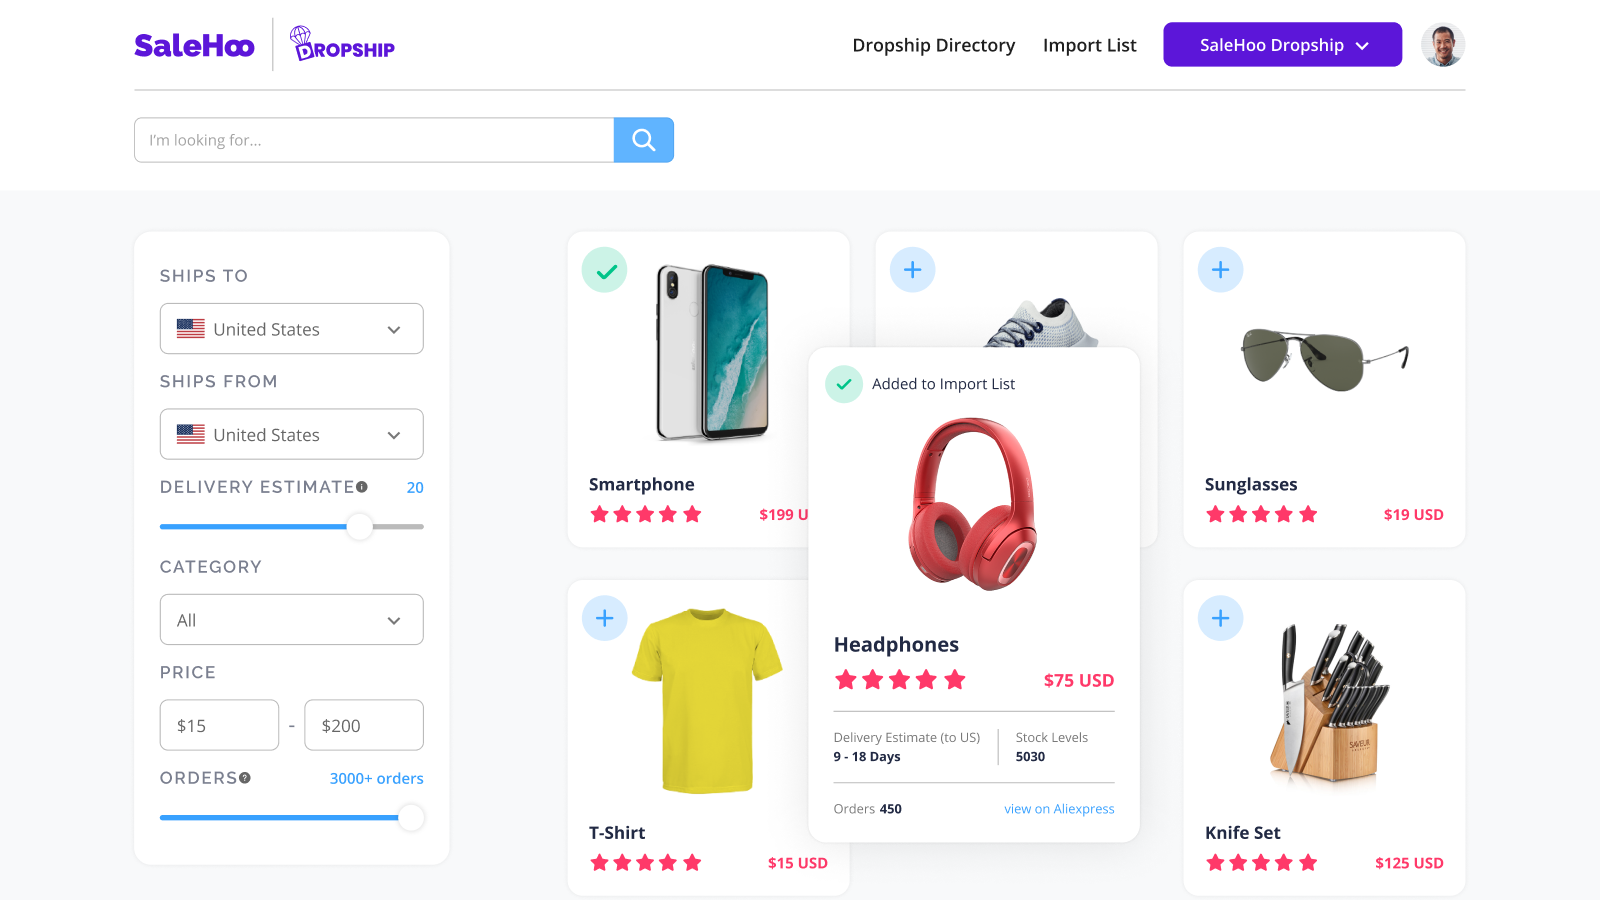 Use SaleHoo Dropship to find high margin products to dropship 